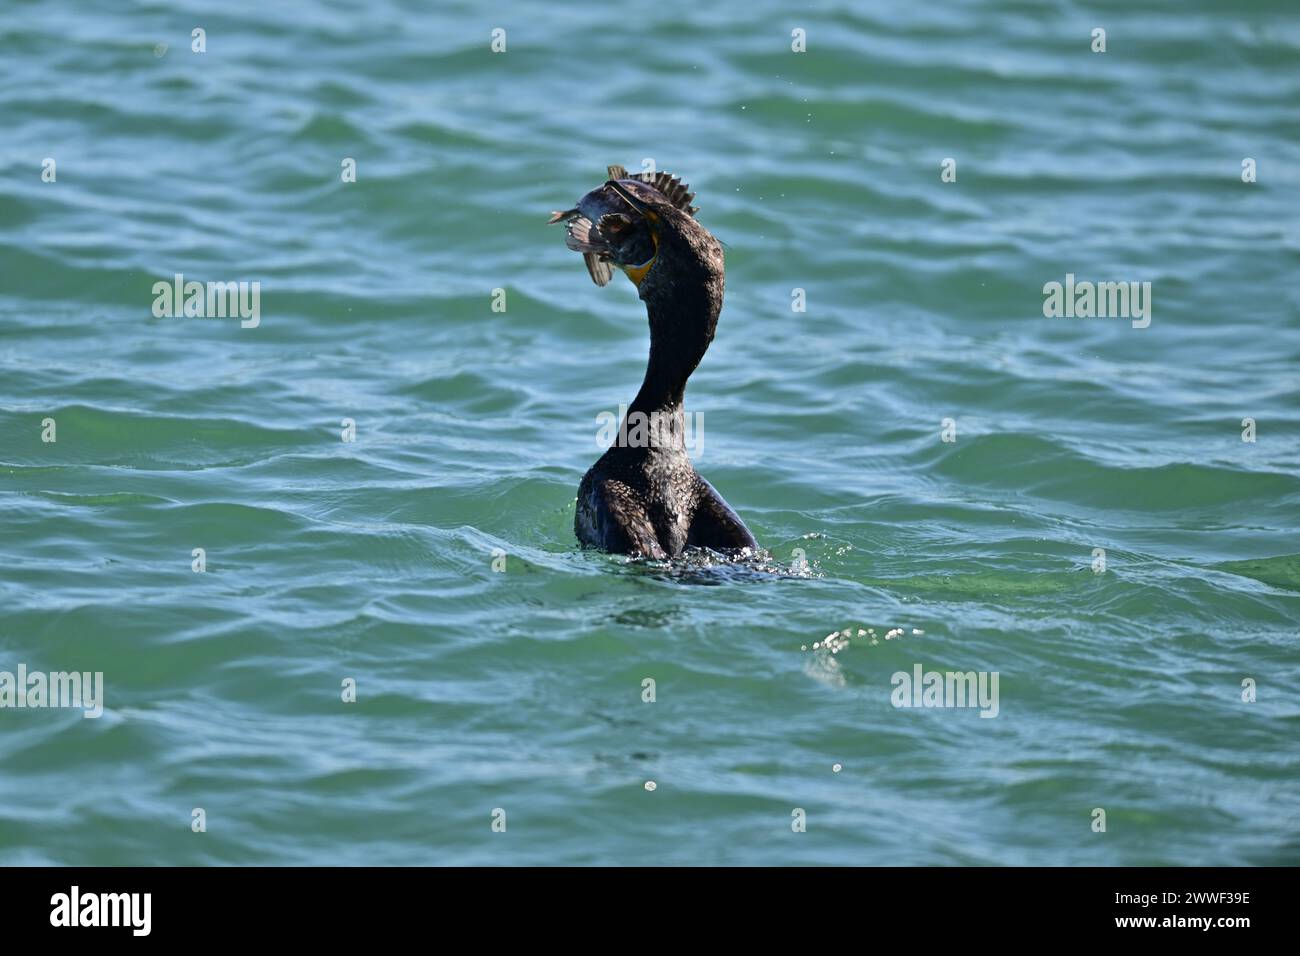 Double-crested Cormorant devouring a Huge Fish - Moss Landing, CA Stock Photo